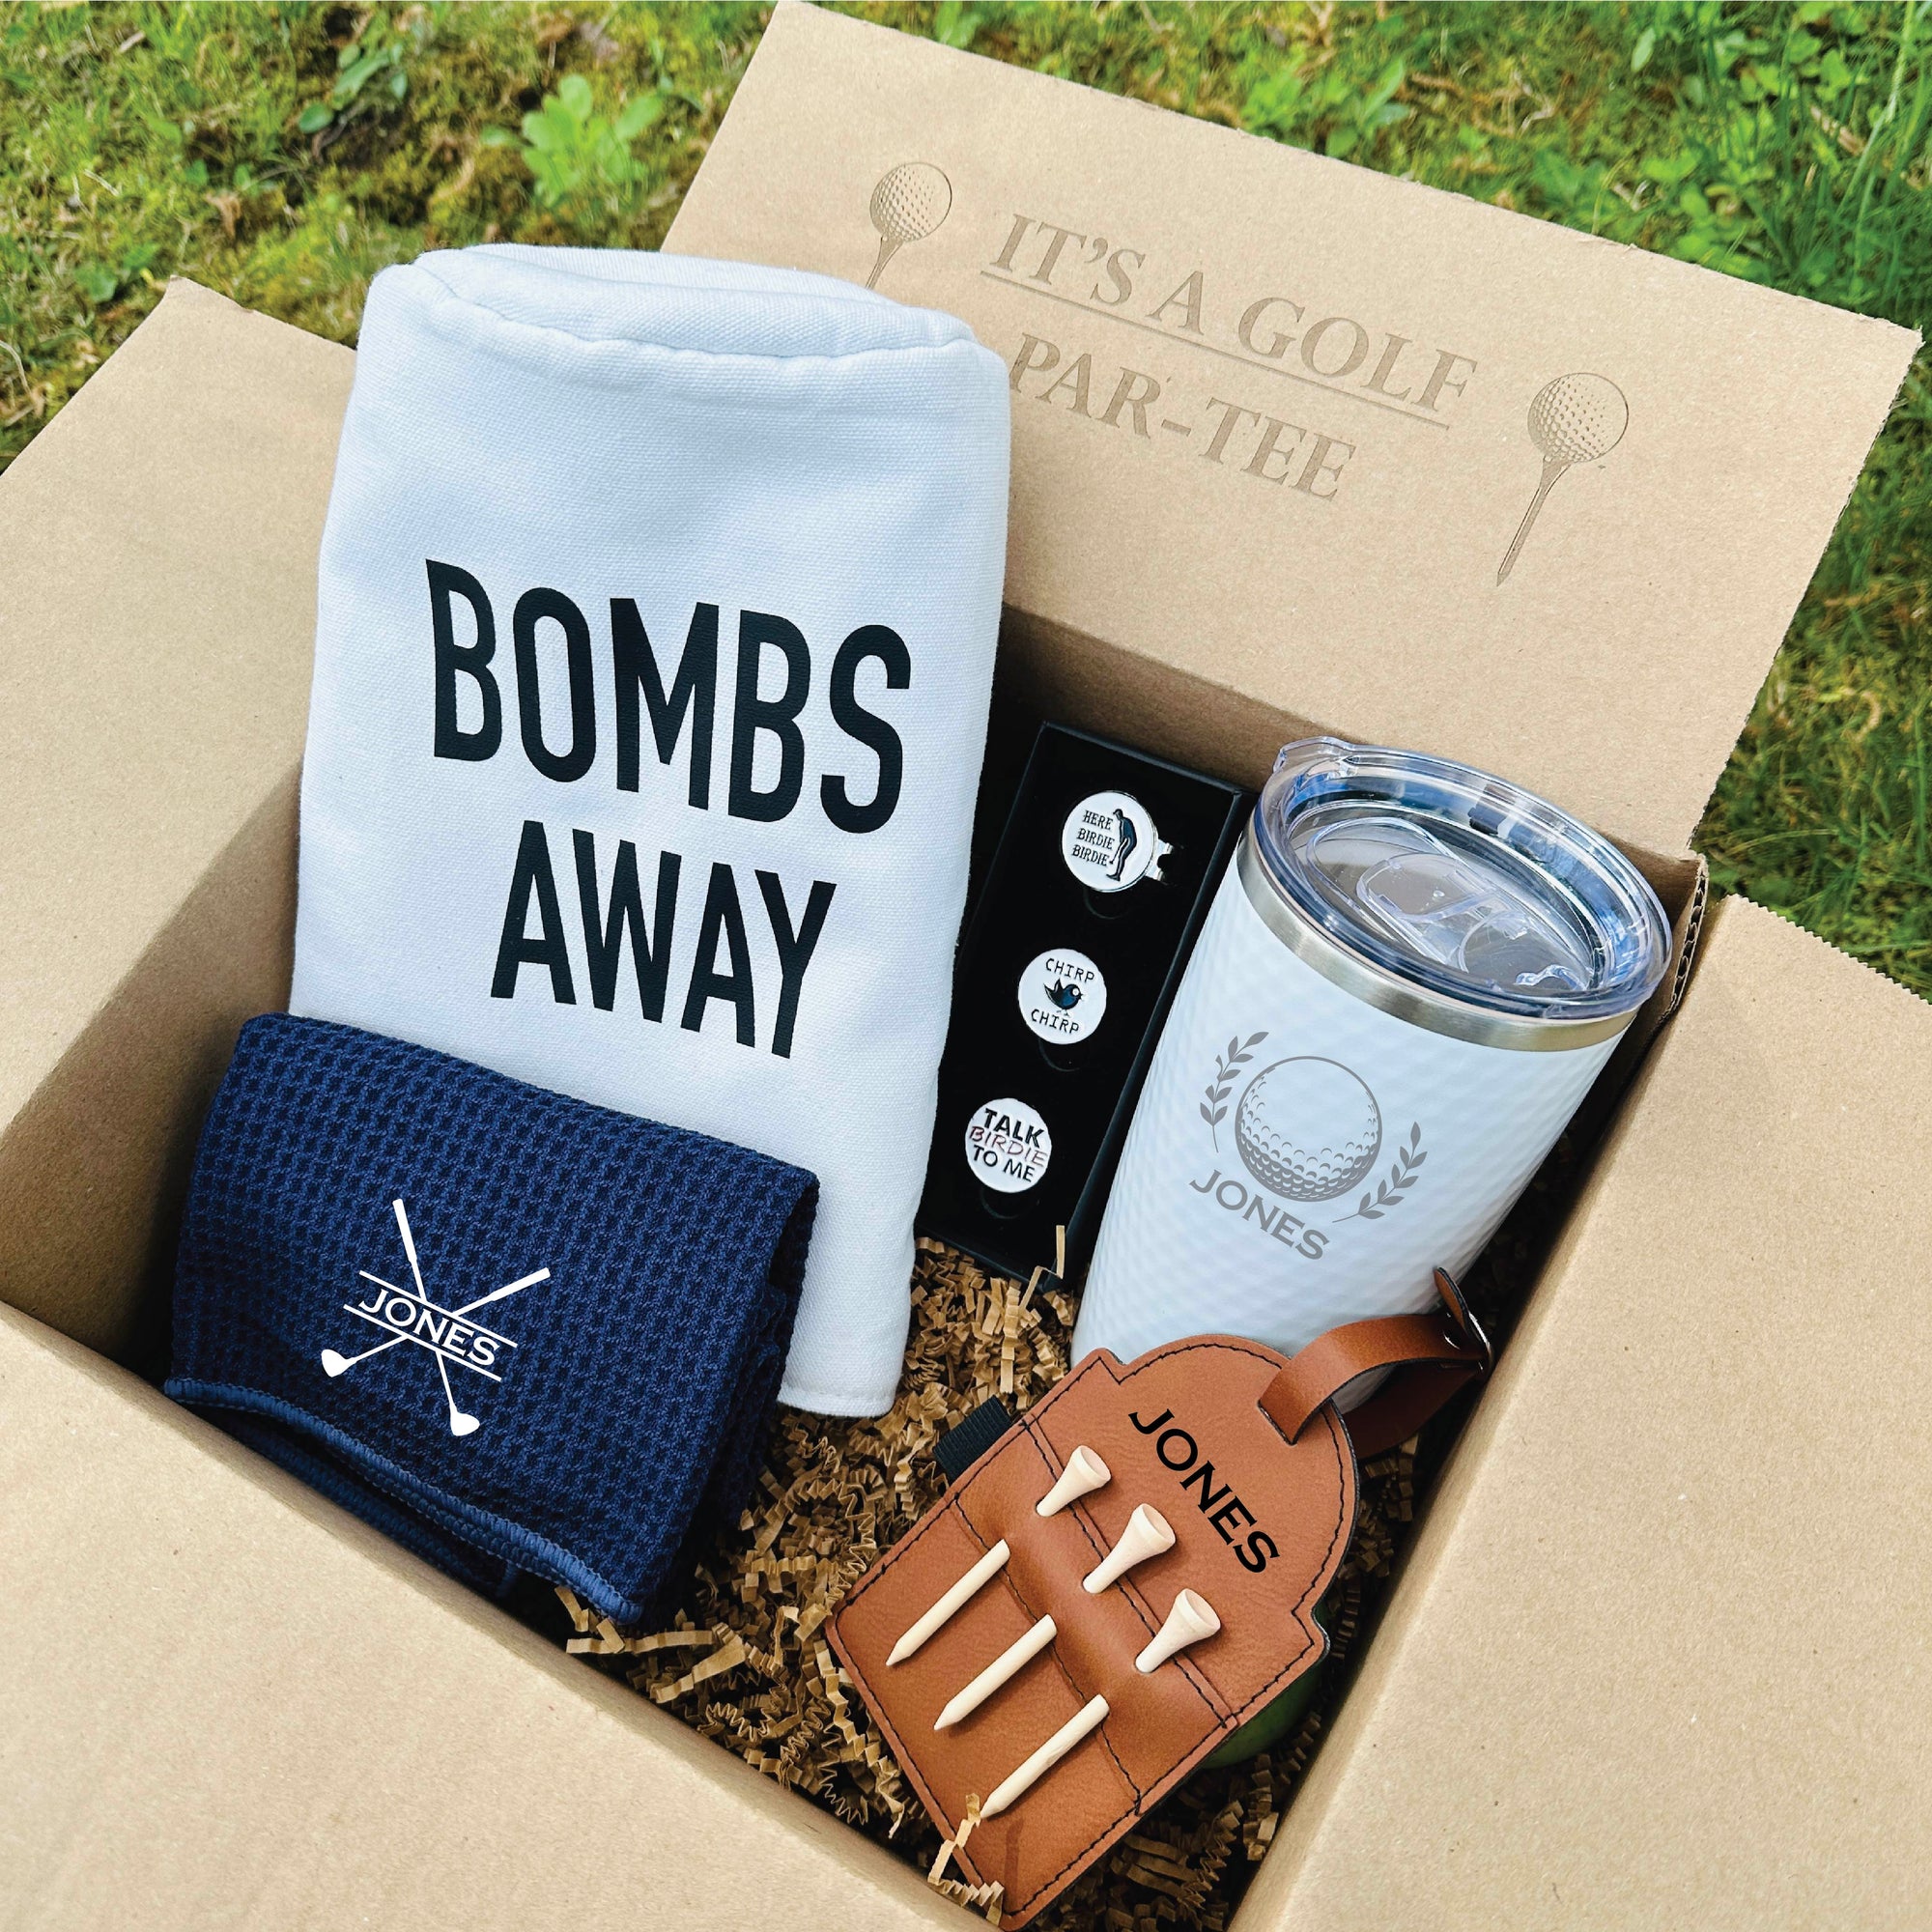 16 Great Bachelor Party Gifts & Ideas (from $9.99) - GroomsDay